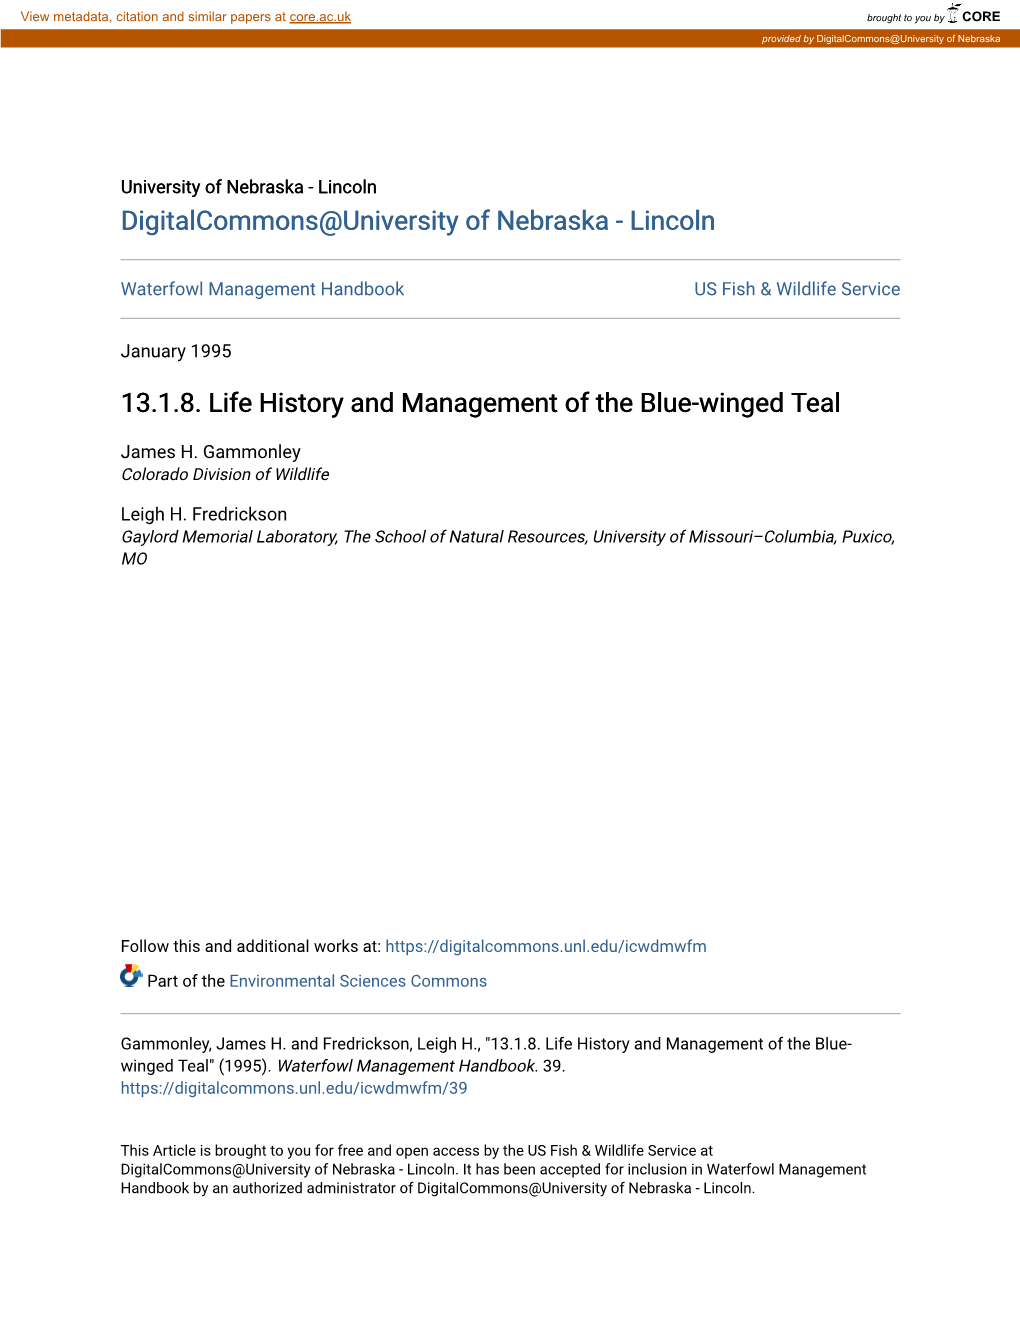 13.1.8. Life History and Management of the Blue-Winged Teal